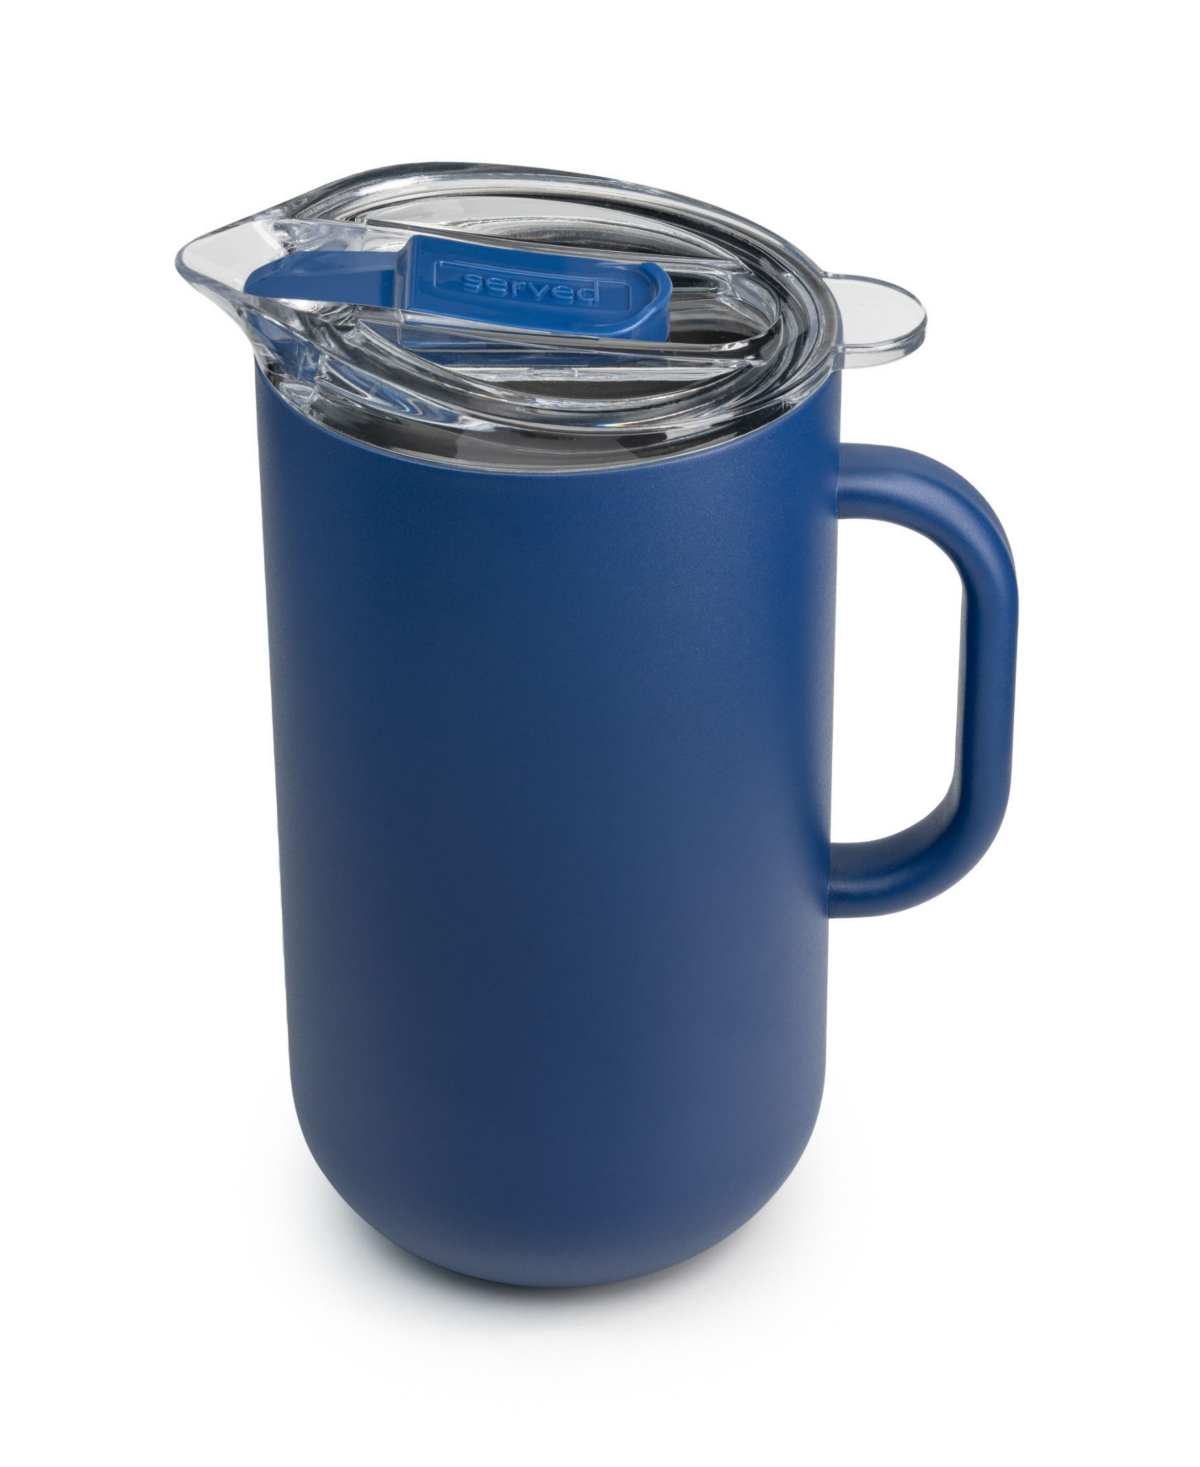 Served Vacuum-insulated Double-walled Copper-lined Stainless Steel Pitcher, 2 Liter In Berry